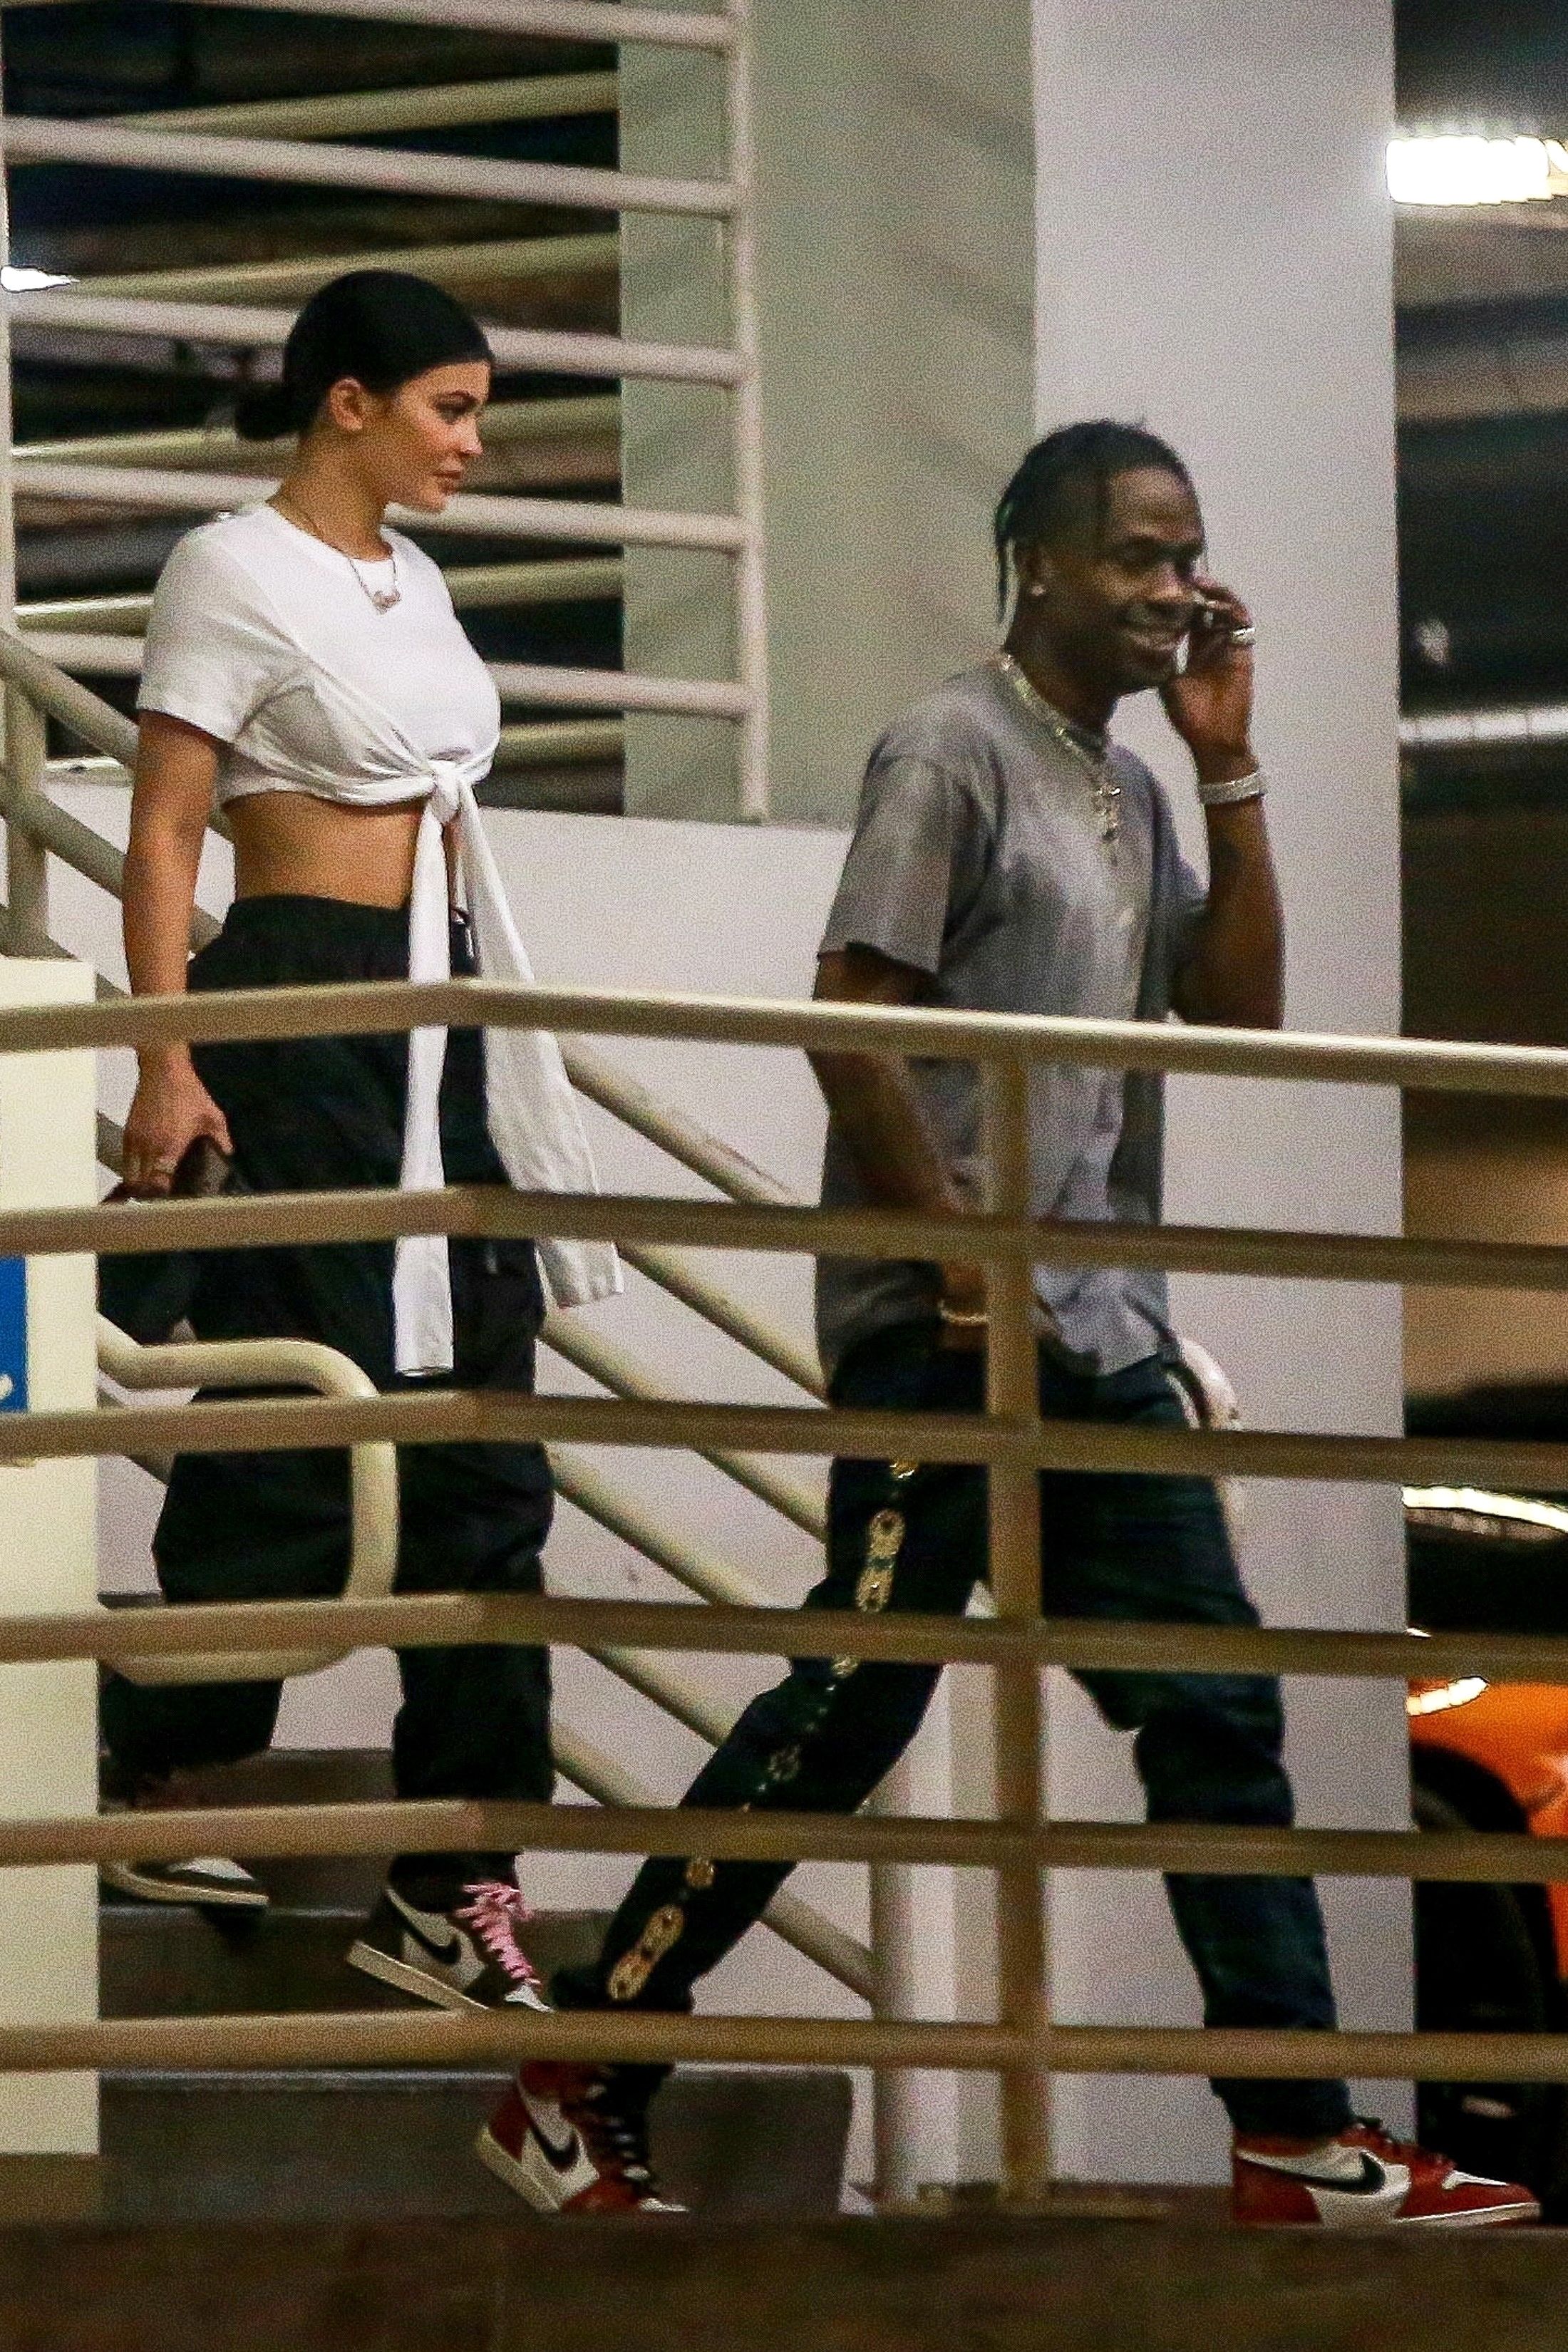 Kylie Jenner and Travis Scott Shop, And She's Wearing Nike!